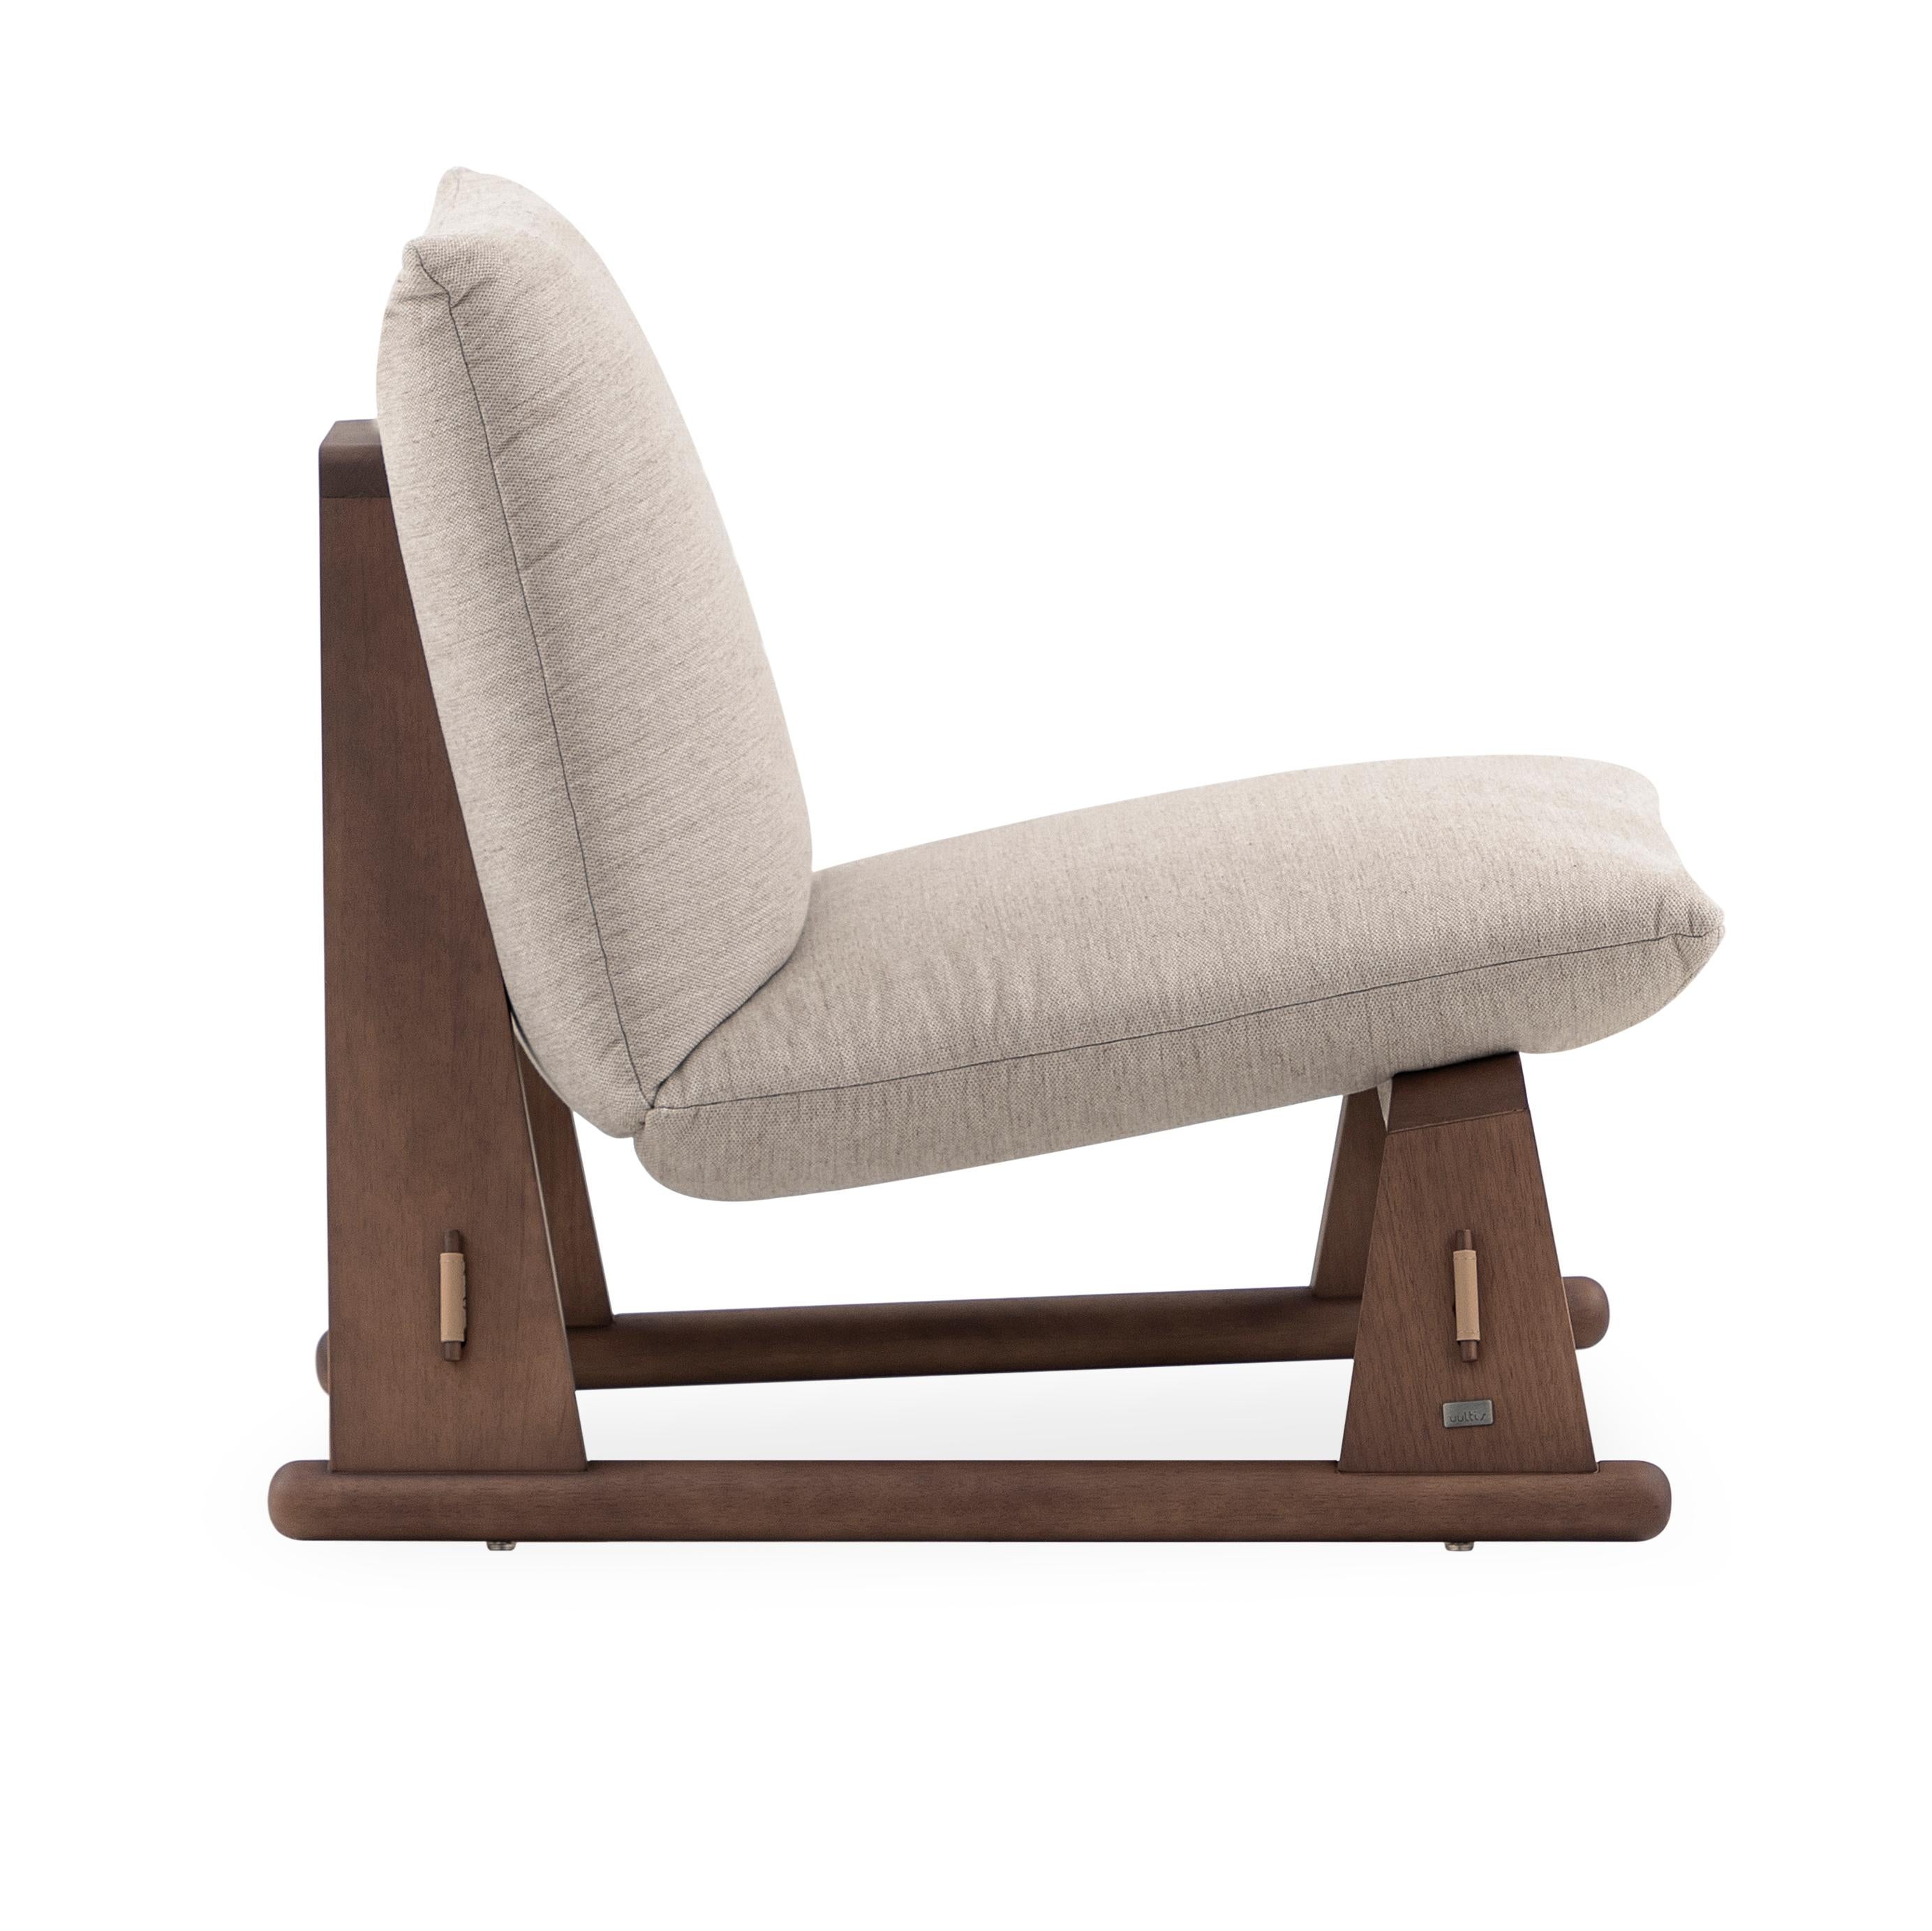 The Contemporary Maia chair is a new way to relax in its walnut wood finish and the upholstered light beige fabric that covers it. The Uultis team has created this chair with a seat and backrest that are made of MDF, it has elastic straps and a